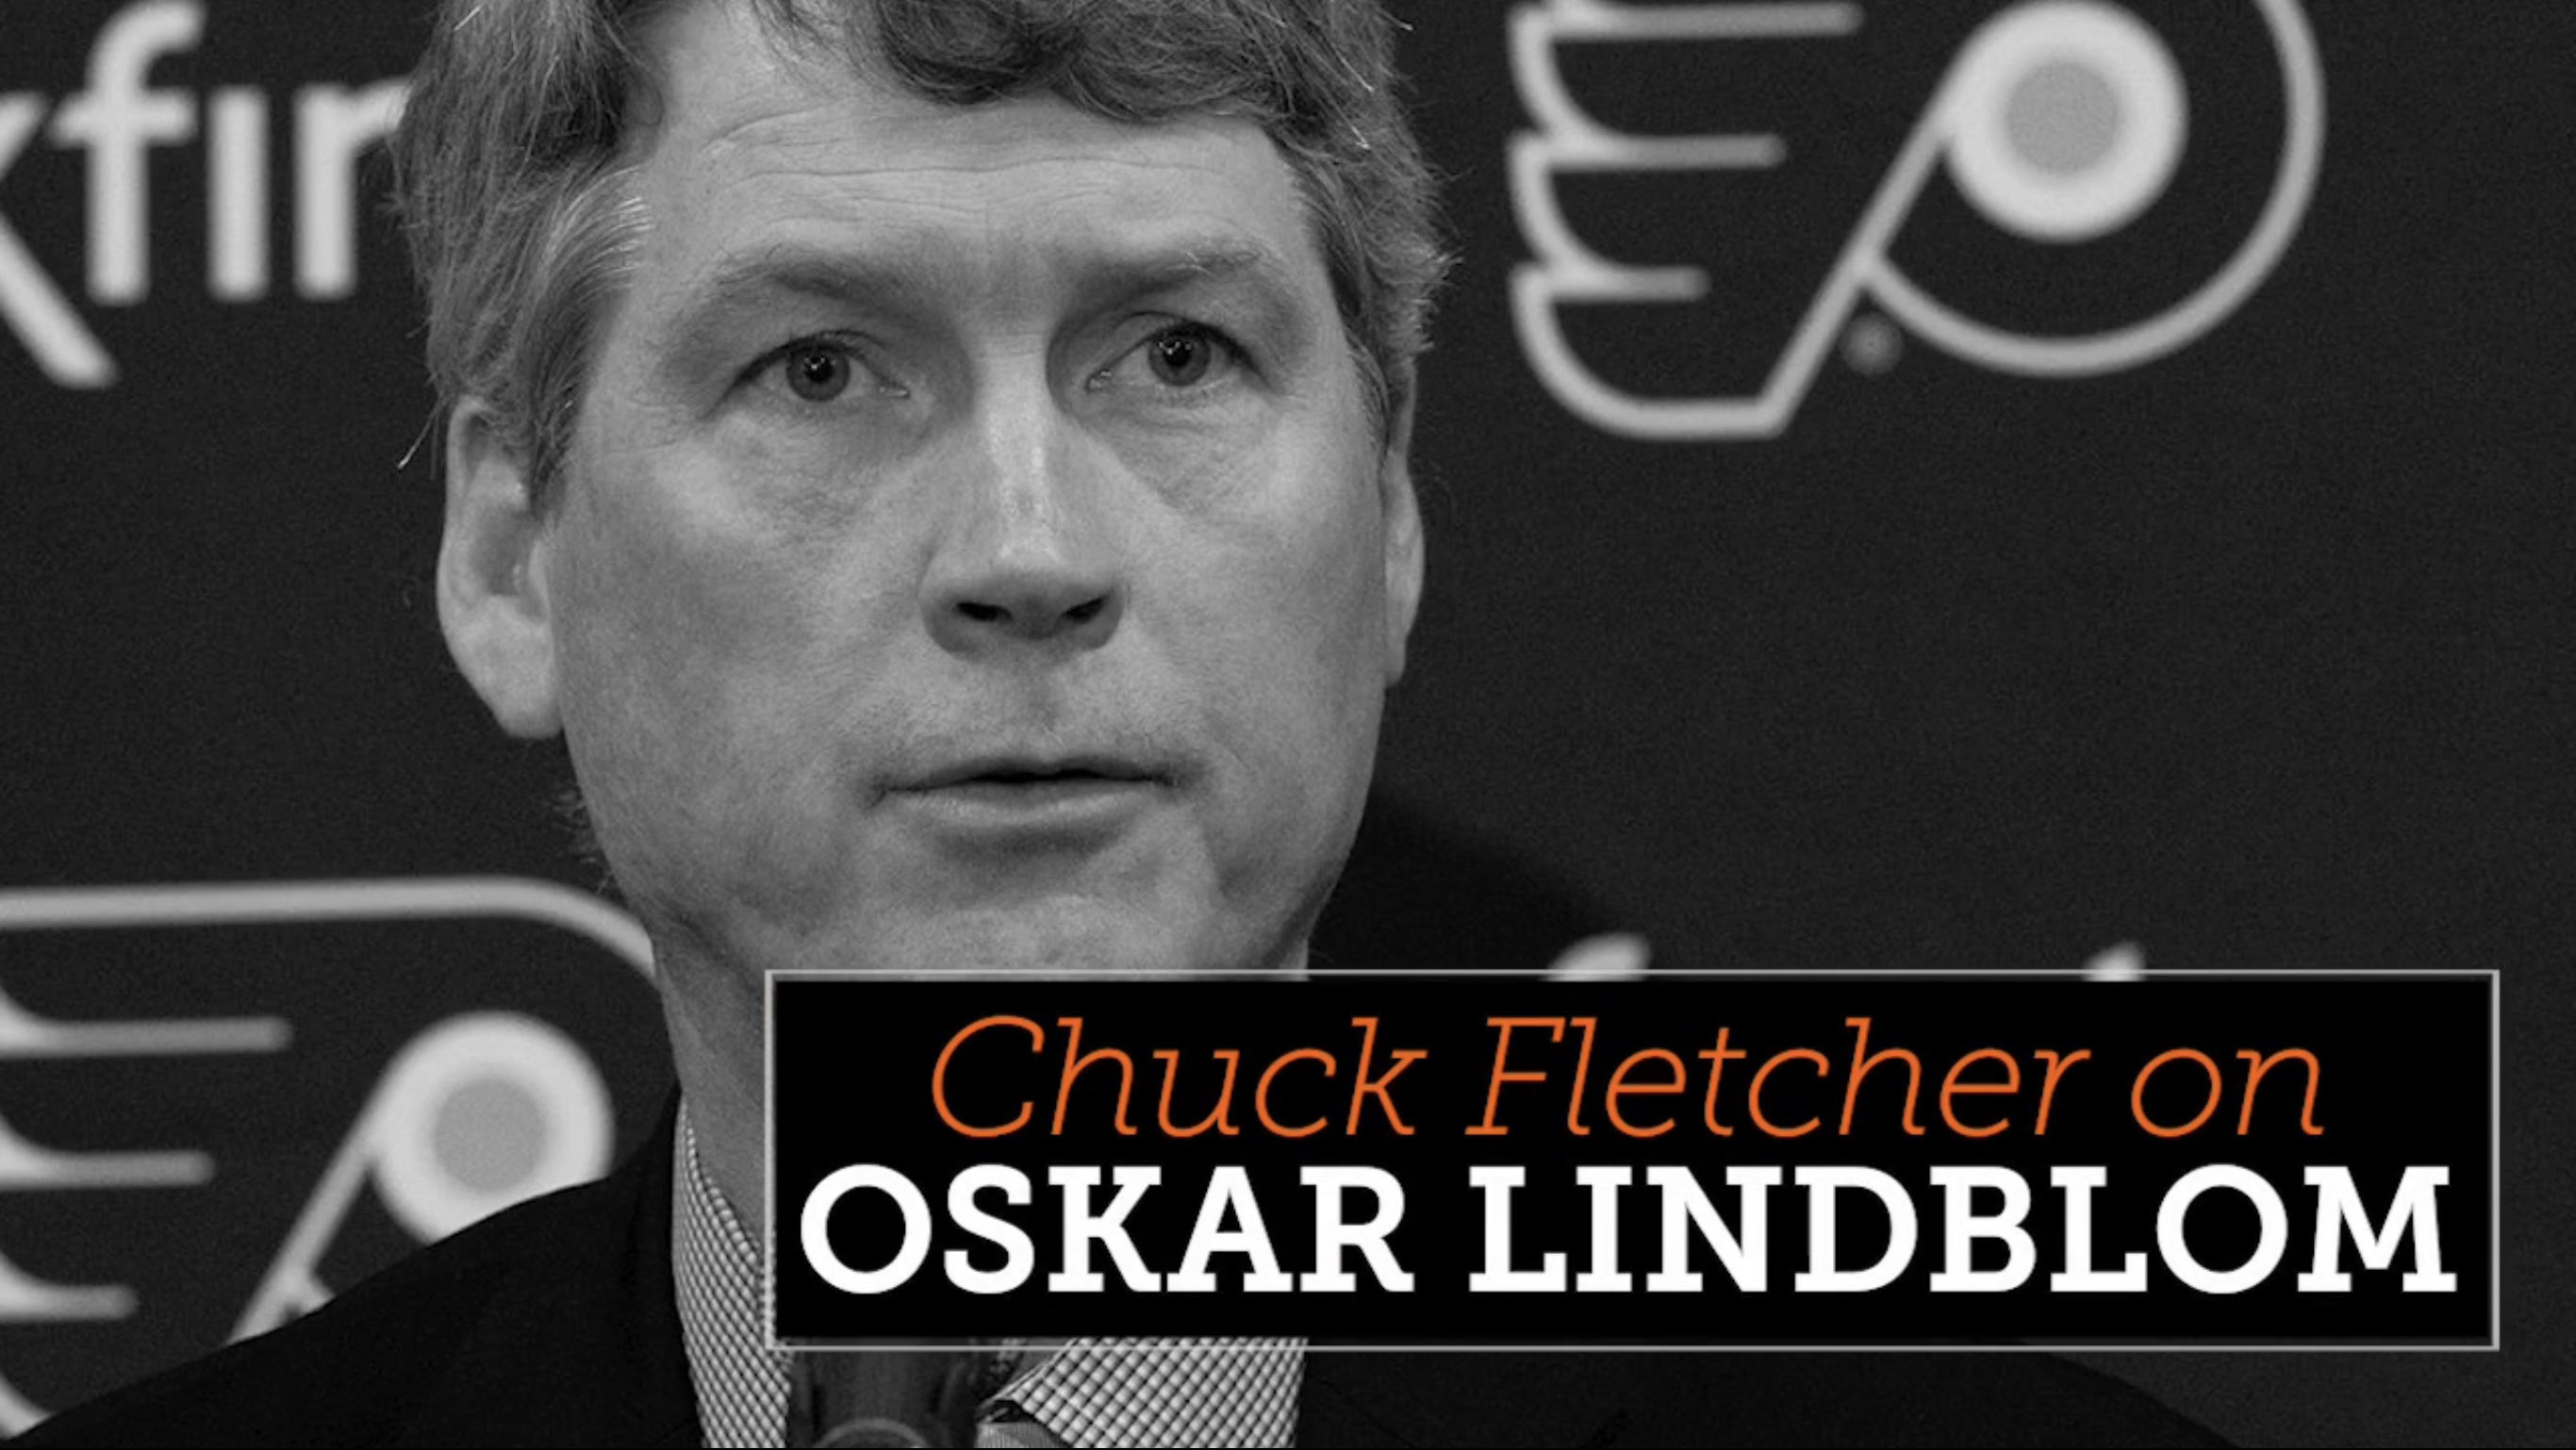 Flyers, coaches thrilled by Oskar Lindbom's return to practice